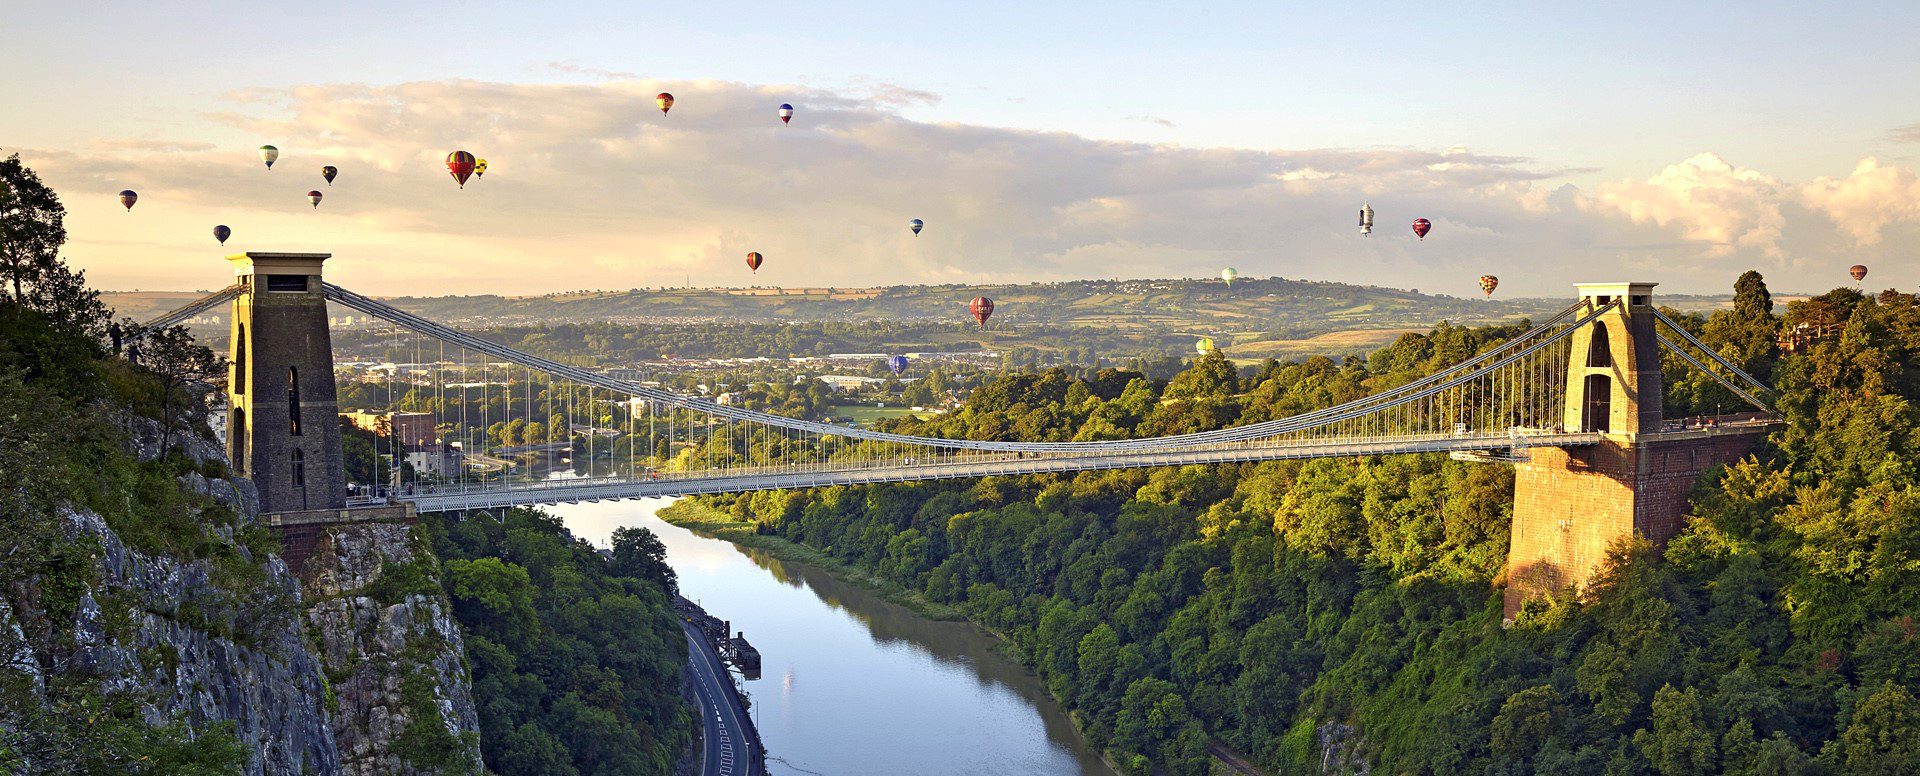 Picturesque shot of Clifton Suspension Bridge lit by the sun with around 15 hot air-balloons in the distance.